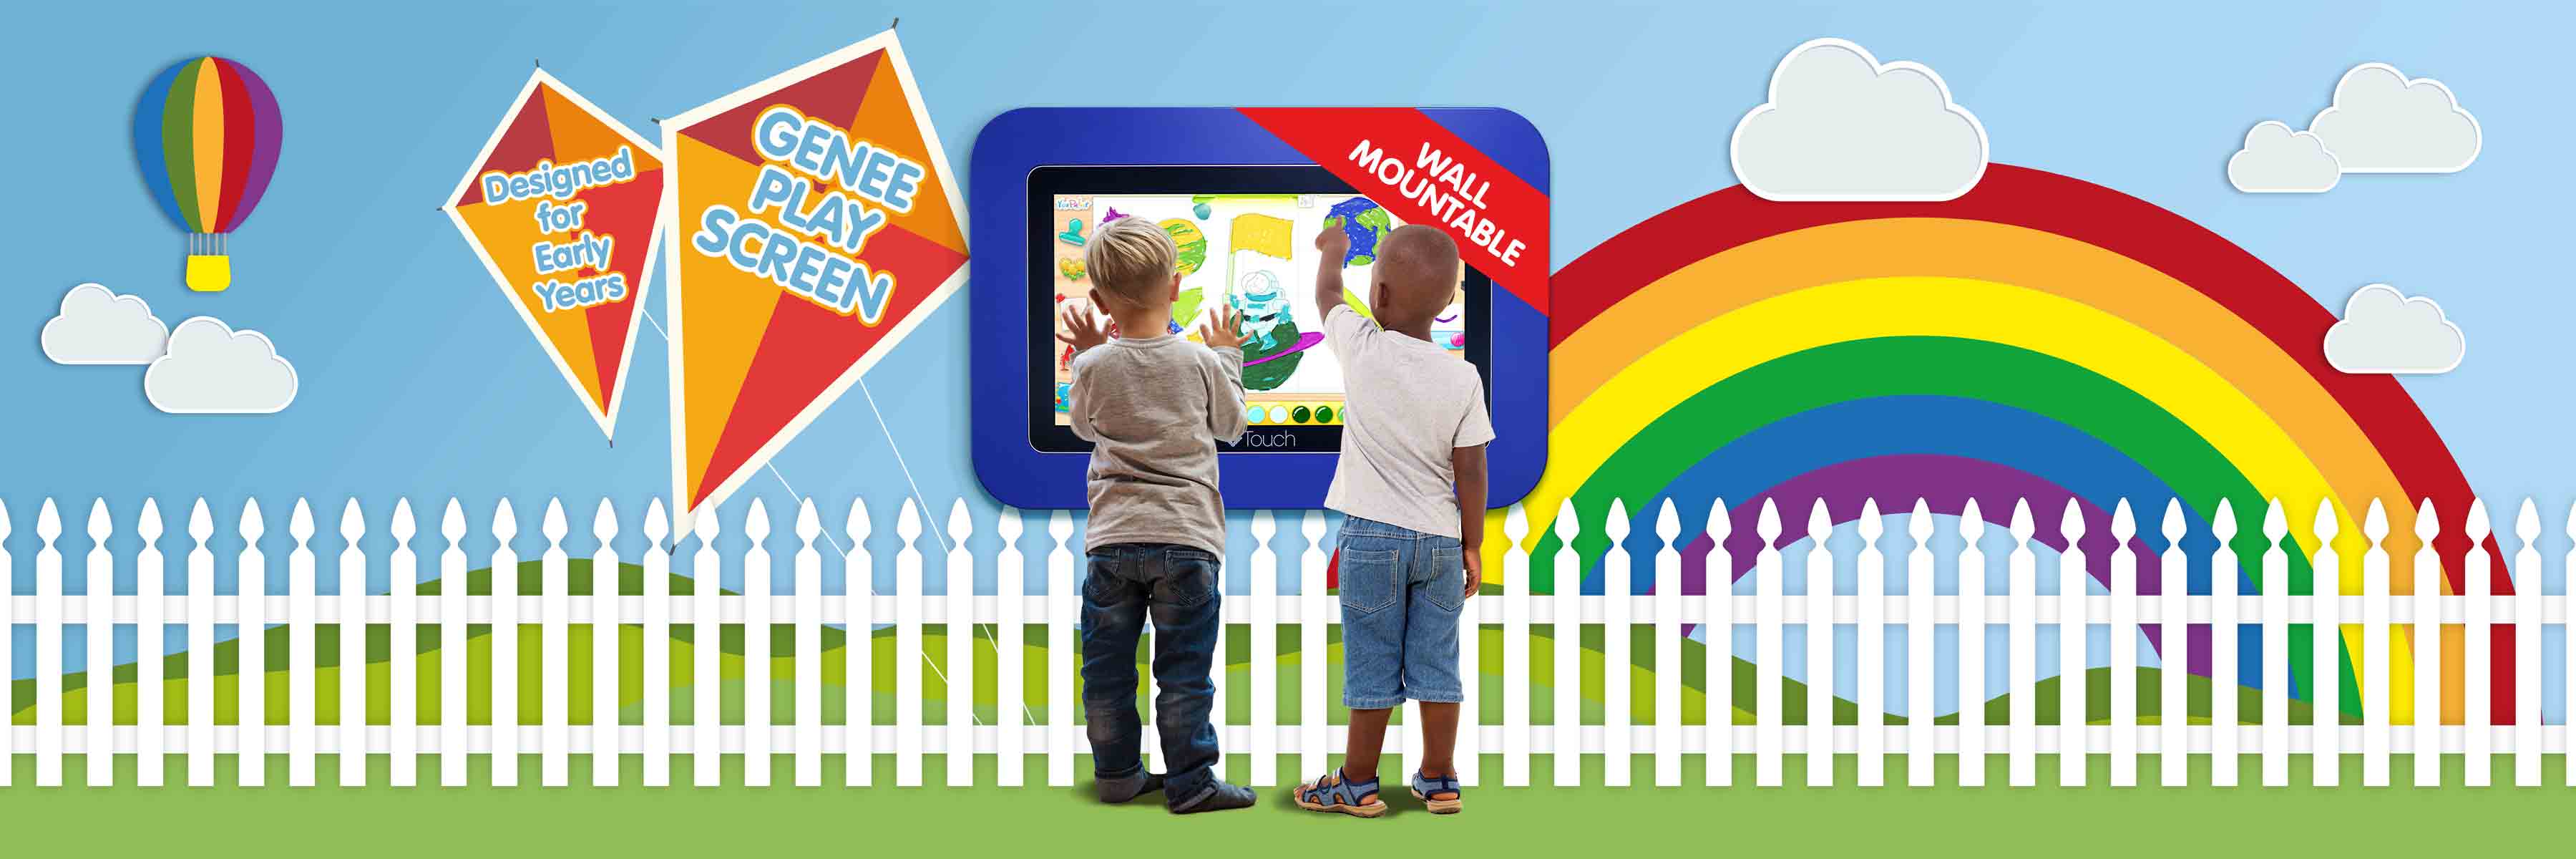 image two young children using the Genee Play Screen